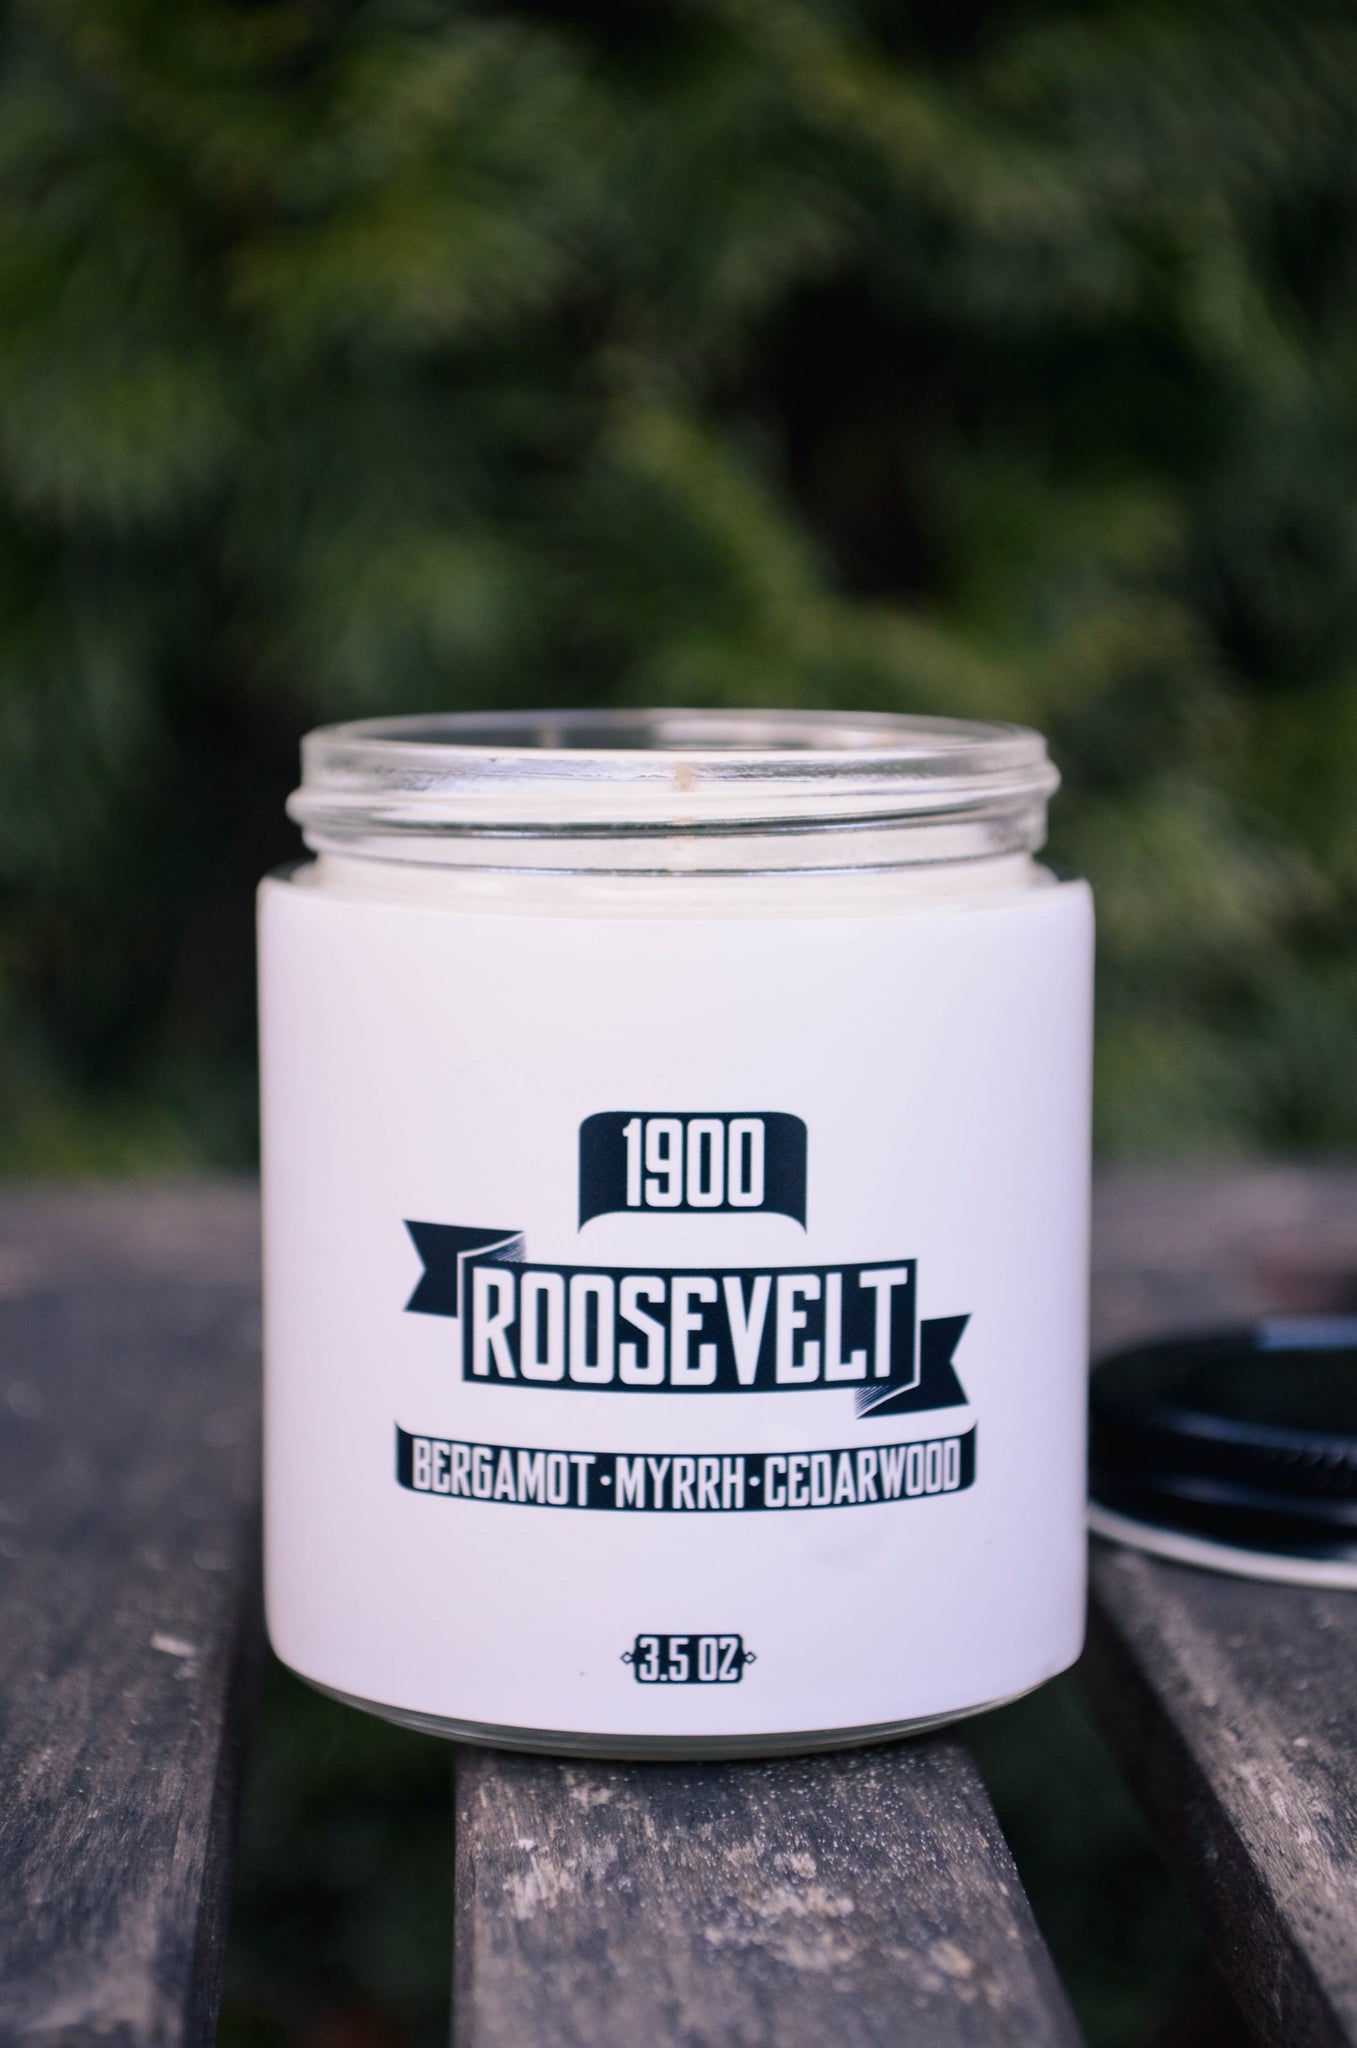 Roosevelt Scented Soy Candle 3.5 oz